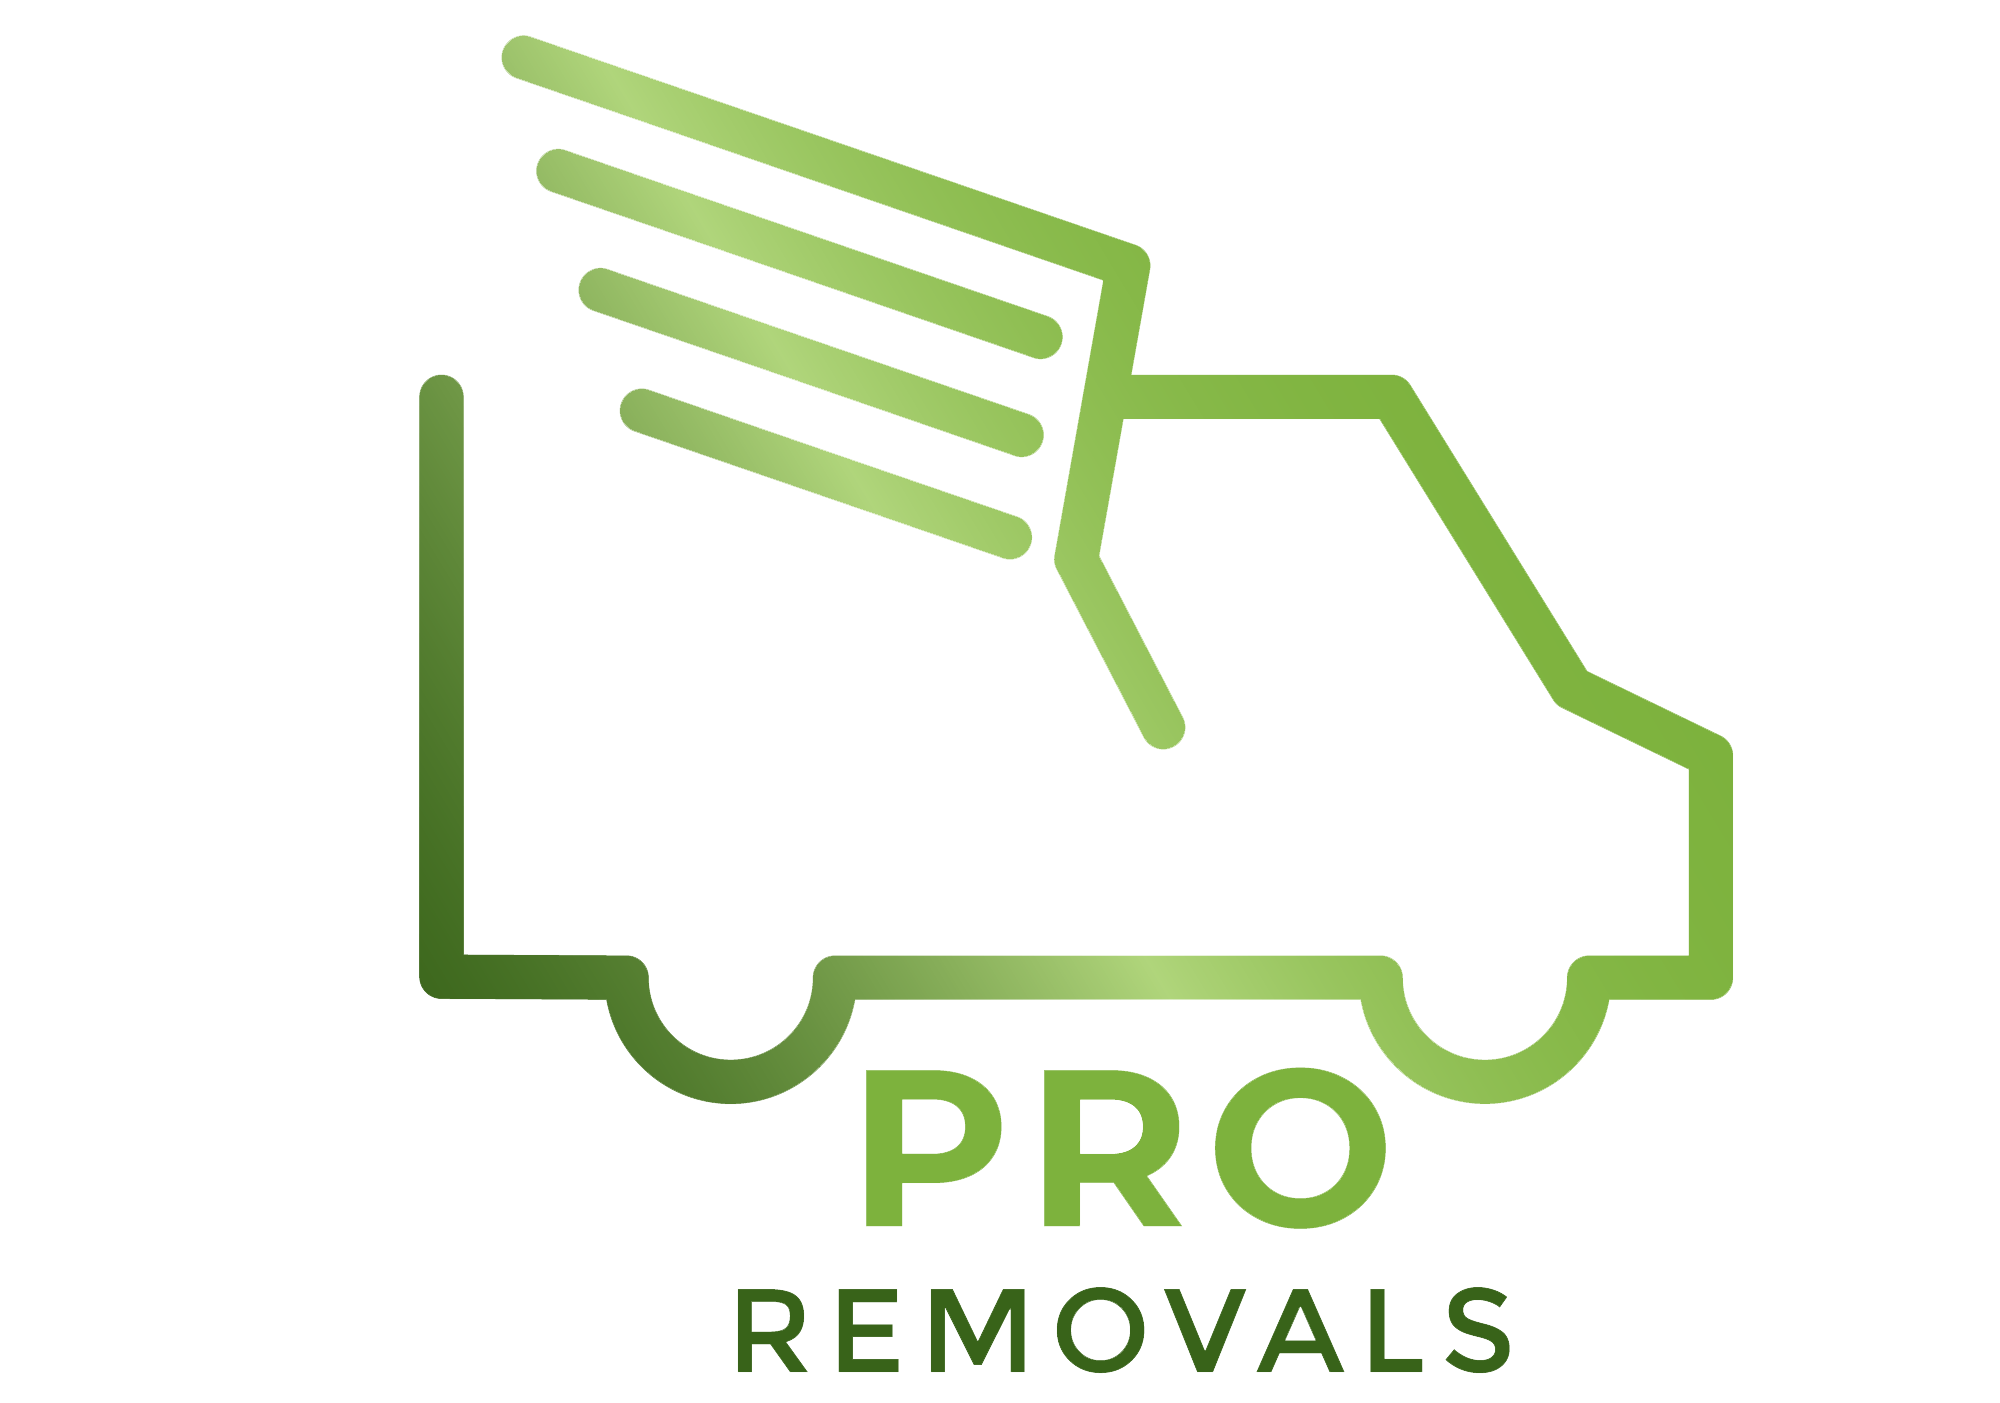 Pro Removals in York Logo